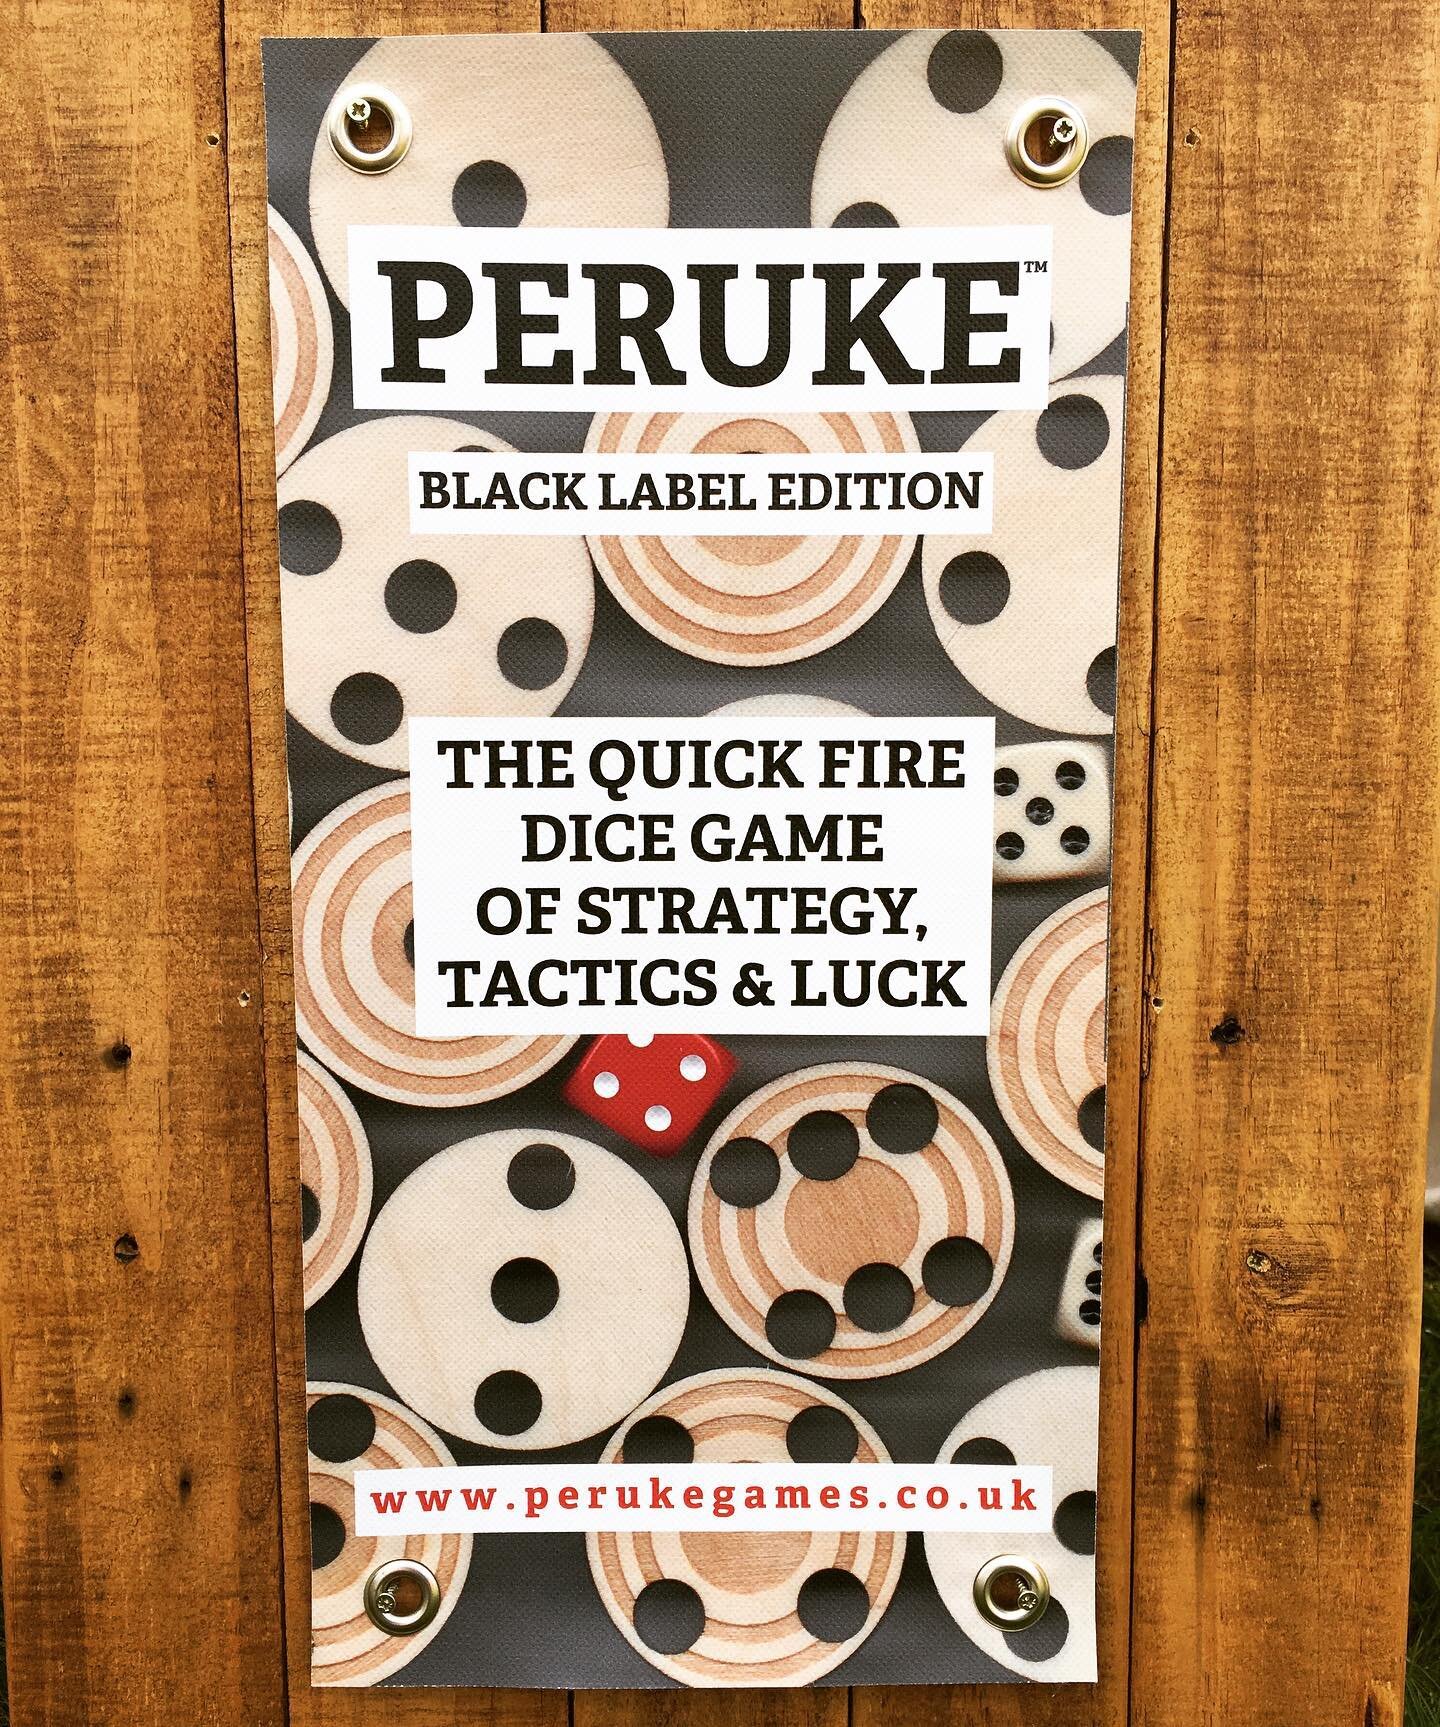 Not long now if you want to get Peruke delivered in time for Christmas 🎲🎲🎲 #giftidea #peruke #christmasgames #games #perukegames #boardgames #tabletopgames #dicegames #rdguk #supportsmallbusiness #indiegame #fungames #caversham #playgames #cooldes